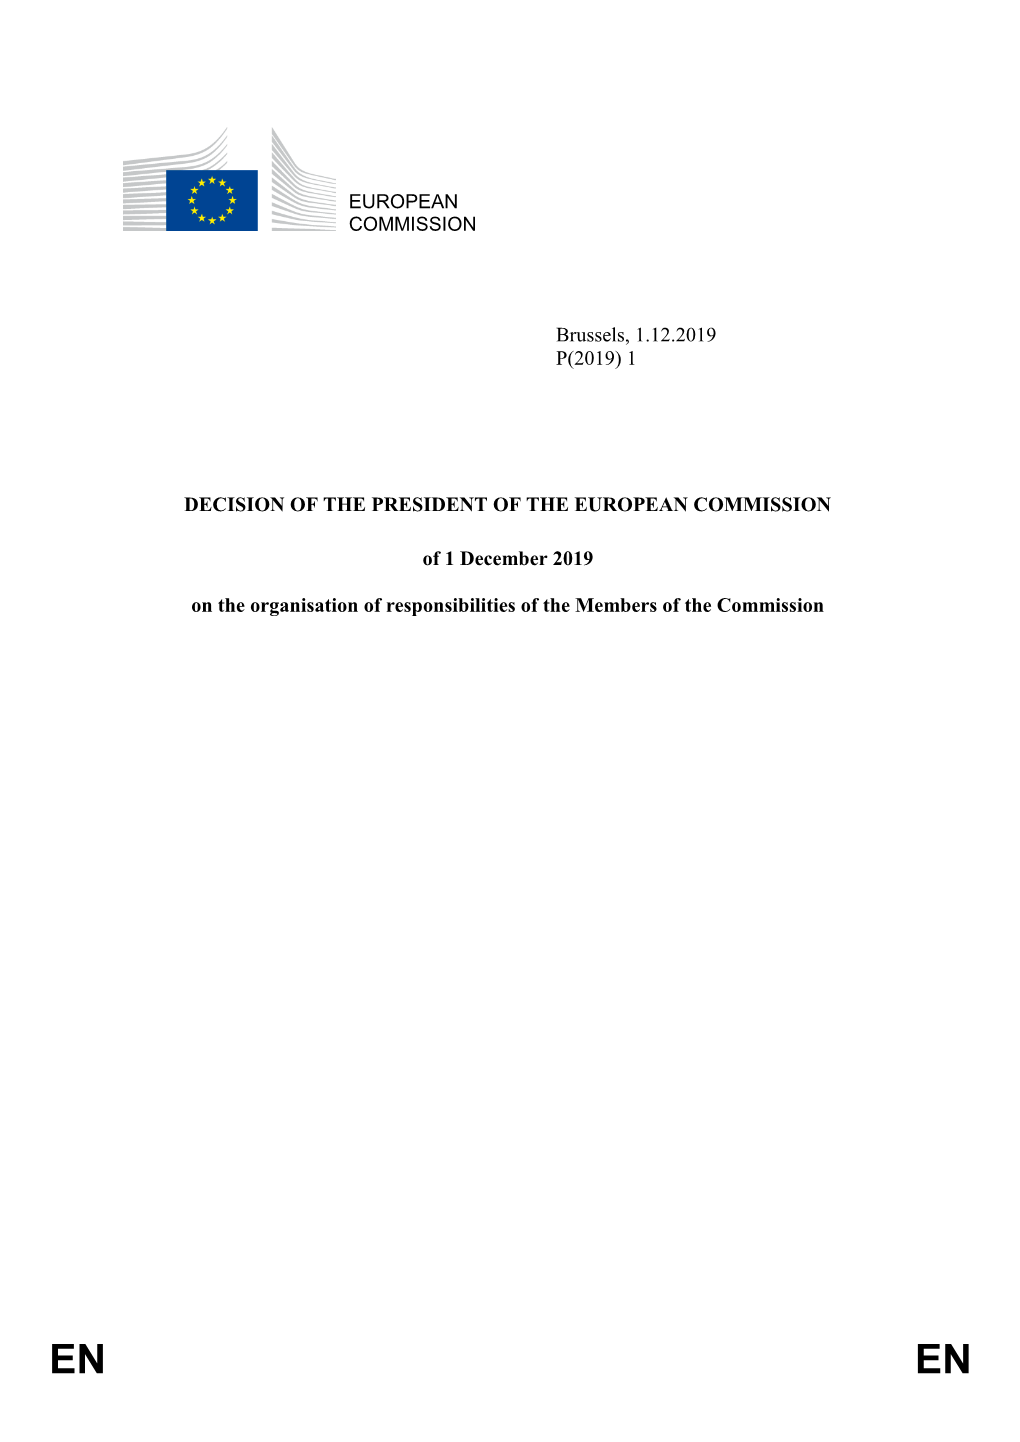 EUROPEAN COMMISSION Brussels, 1.12.2019 P(2019) 1 DECISION OF